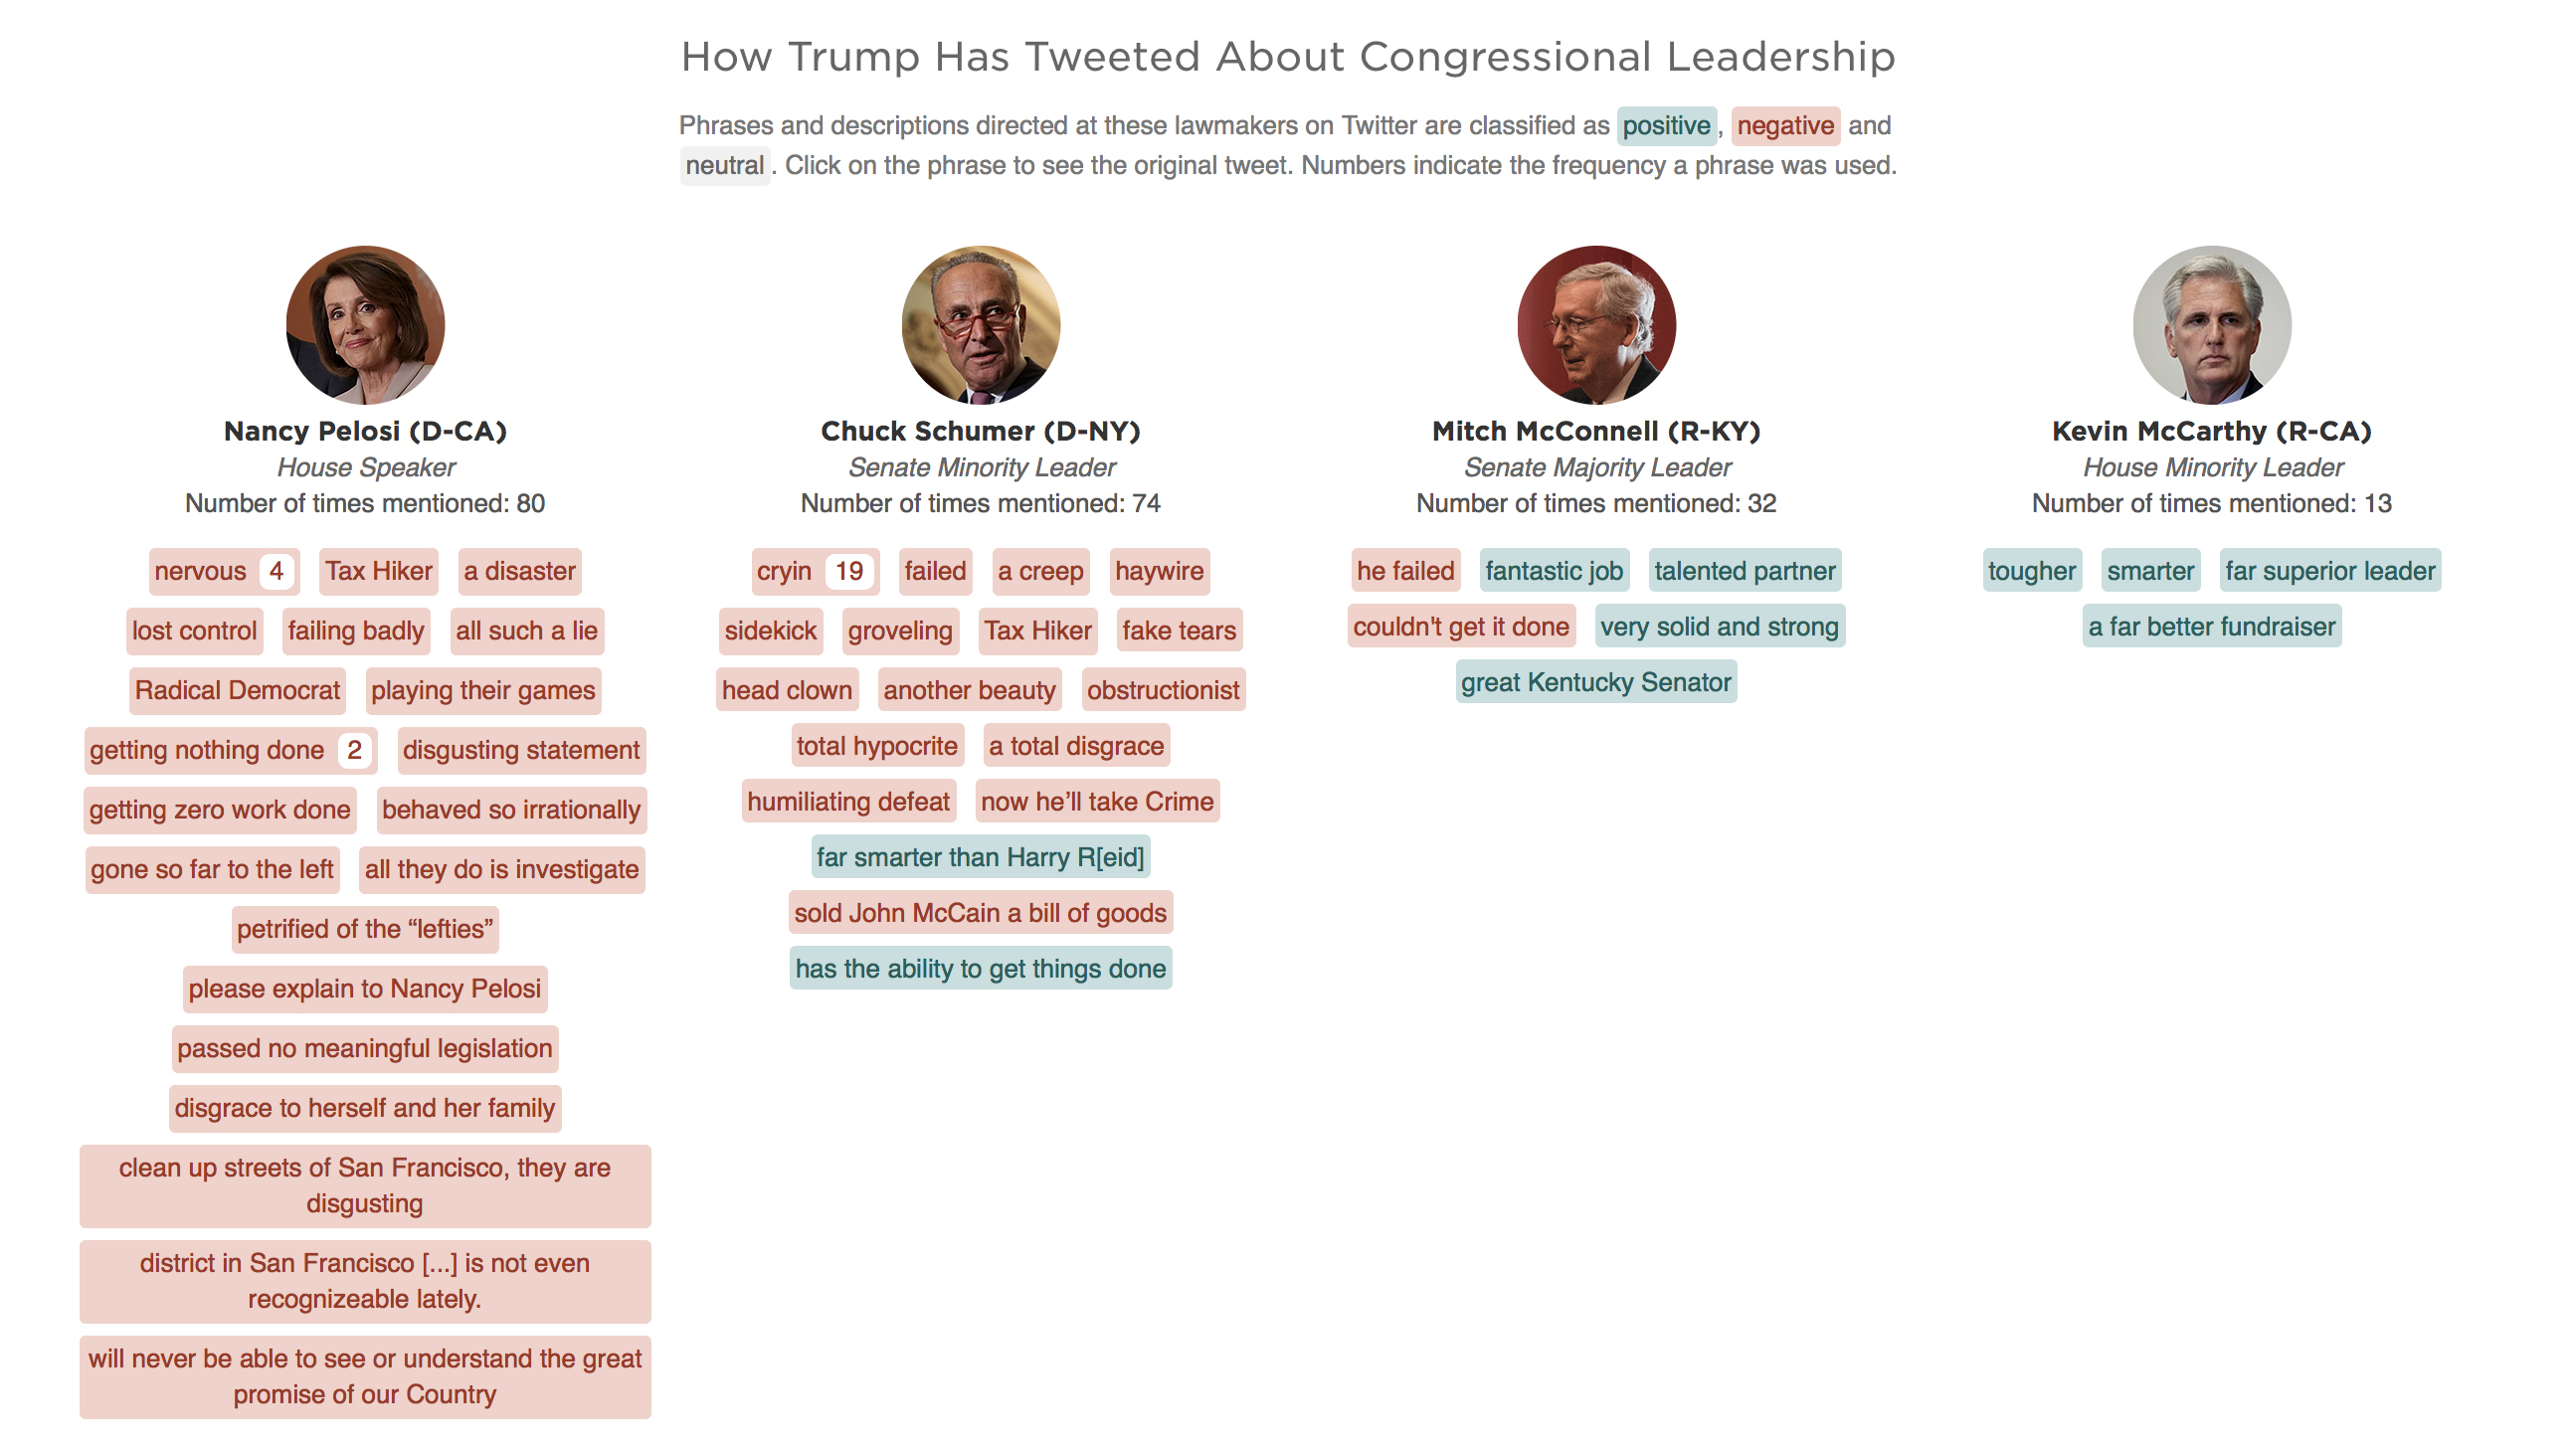 Note: The tweet excerpts shown here are verbatim selections from Donald Trump's tweets. There may be other tweets referencing these individuals that are not shown.  Photos: Chip Somodevilla/Getty Images (Pelosi); Alex Wong/Getty Images (Schumer); Claire H